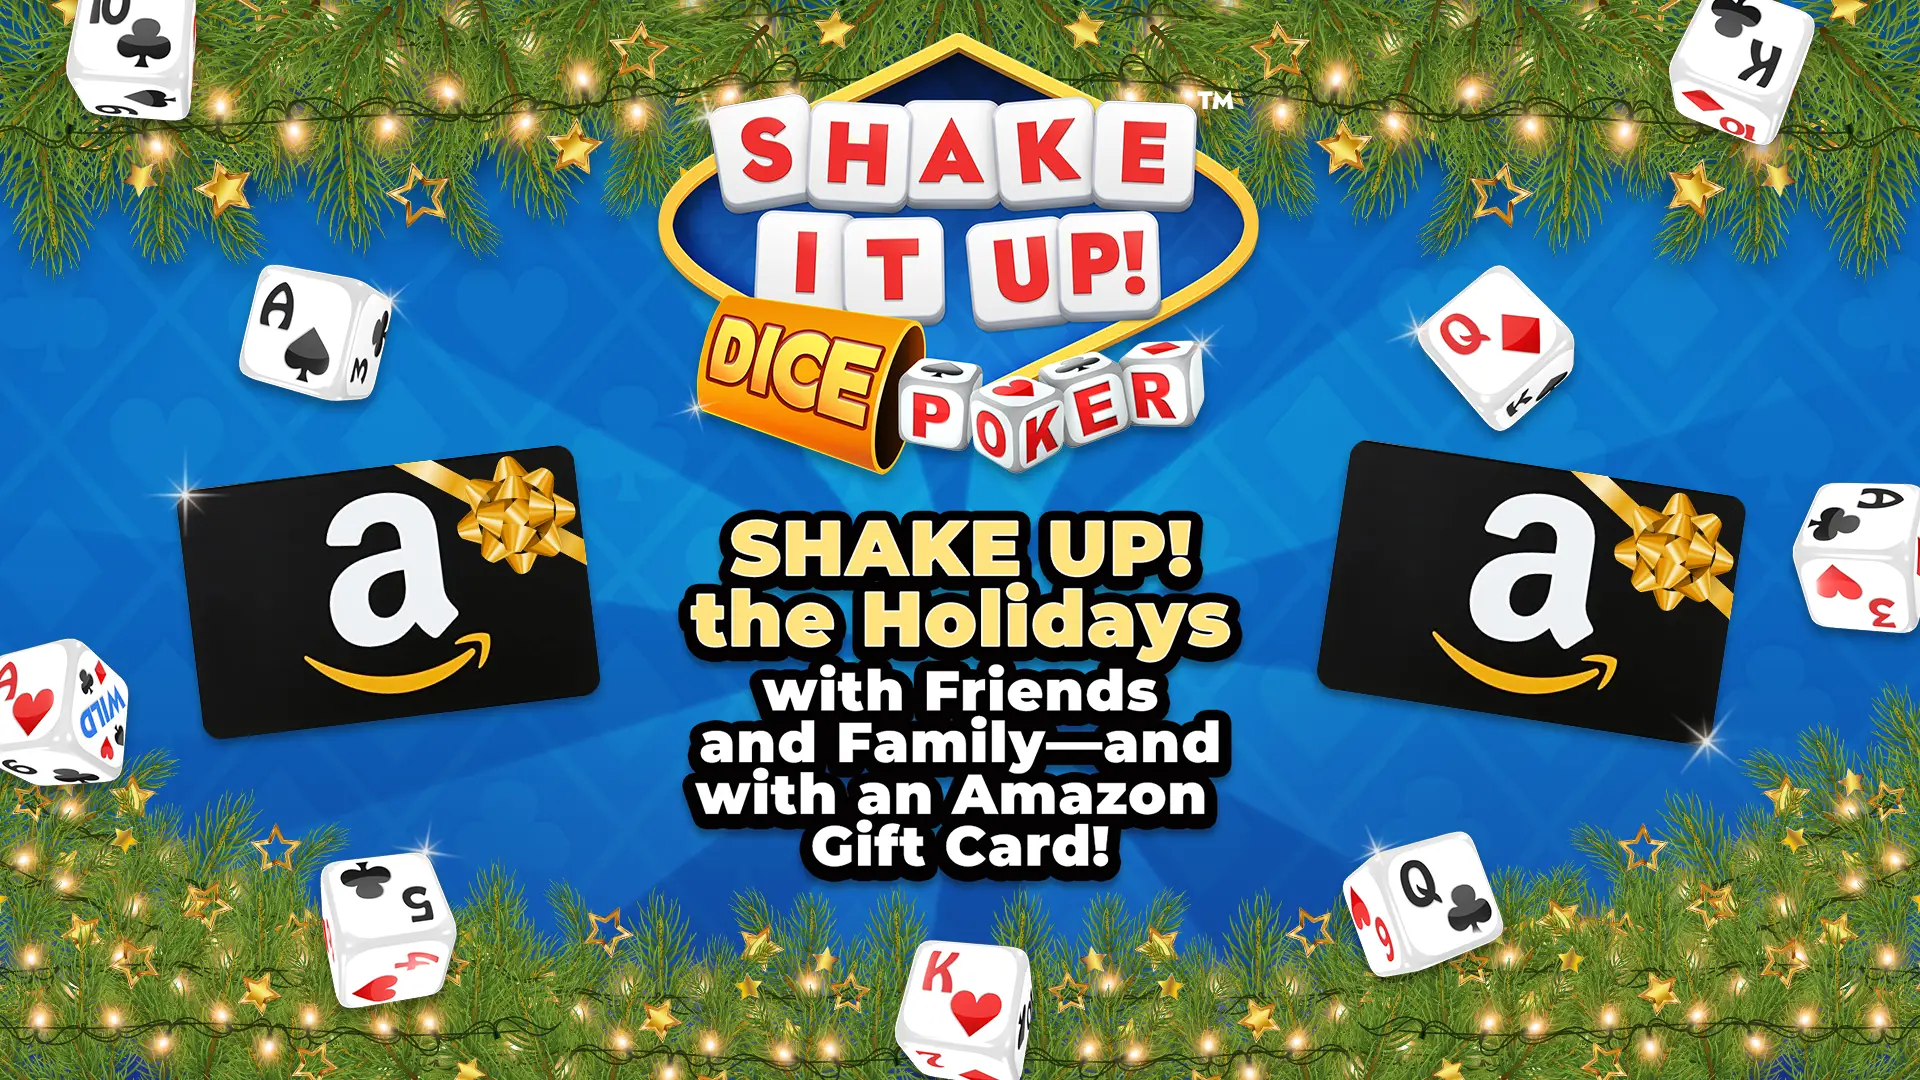 Enter for your chance to win $25 to $100 in Amazon gift cards when you enter the SHAKE UP! the Holidays Sweepstakes. You must be a permanent US resident, 18 and older and then you may enter 5 times per day during the Giveaway Period